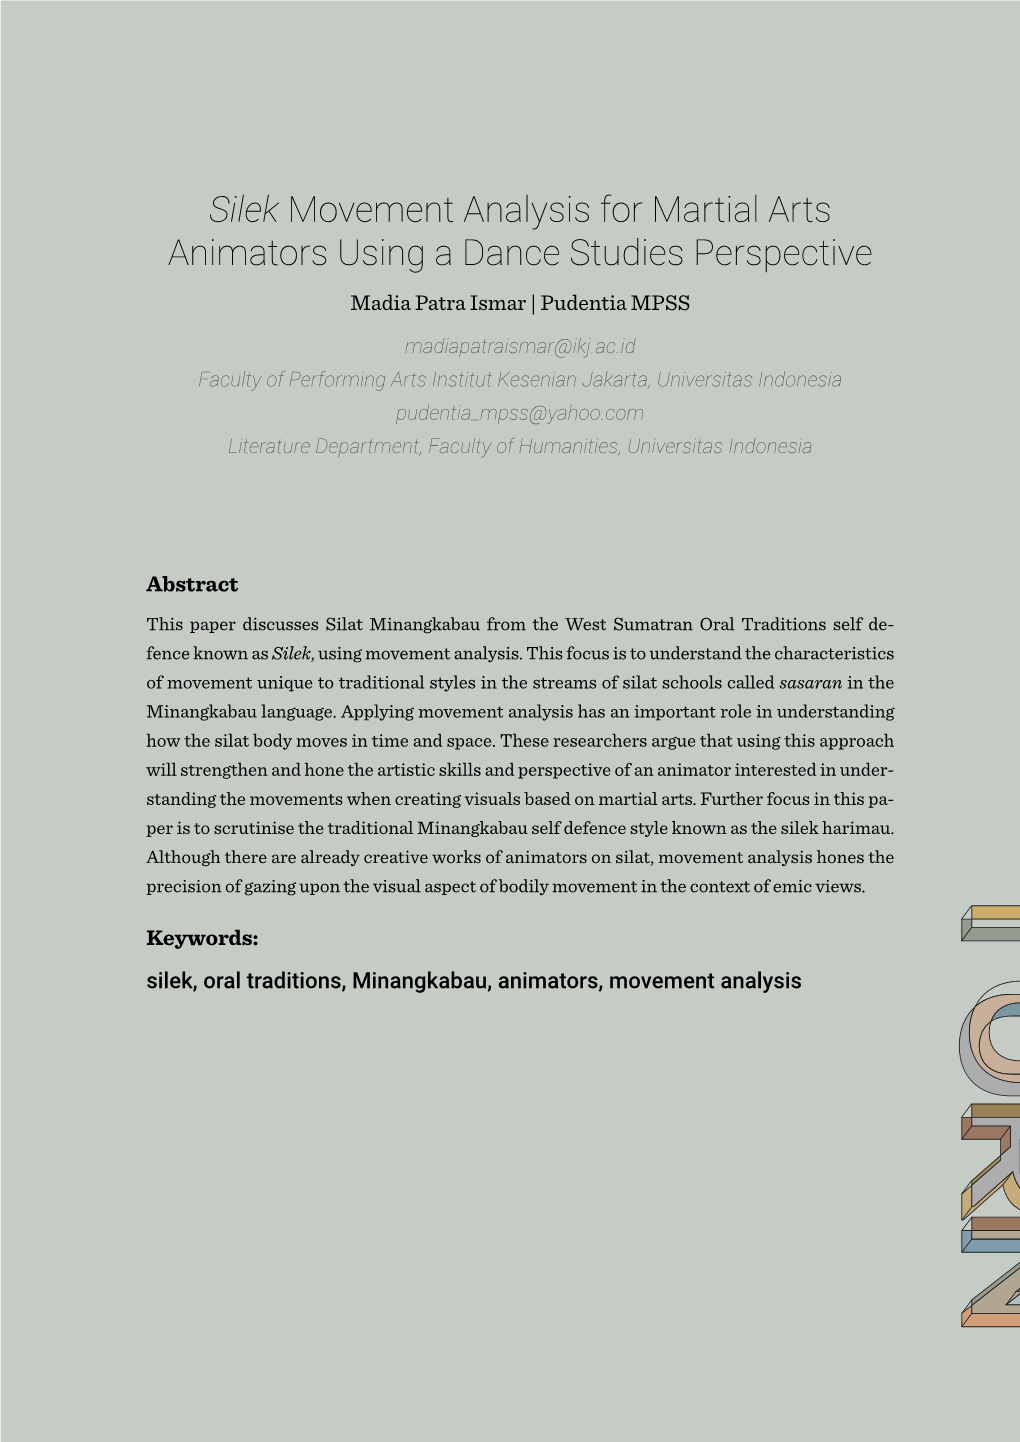 Silek Movement Analysis for Martial Arts Animators Using a Dance Studies Perspective Madia Patra Ismar | Pudentia MPSS